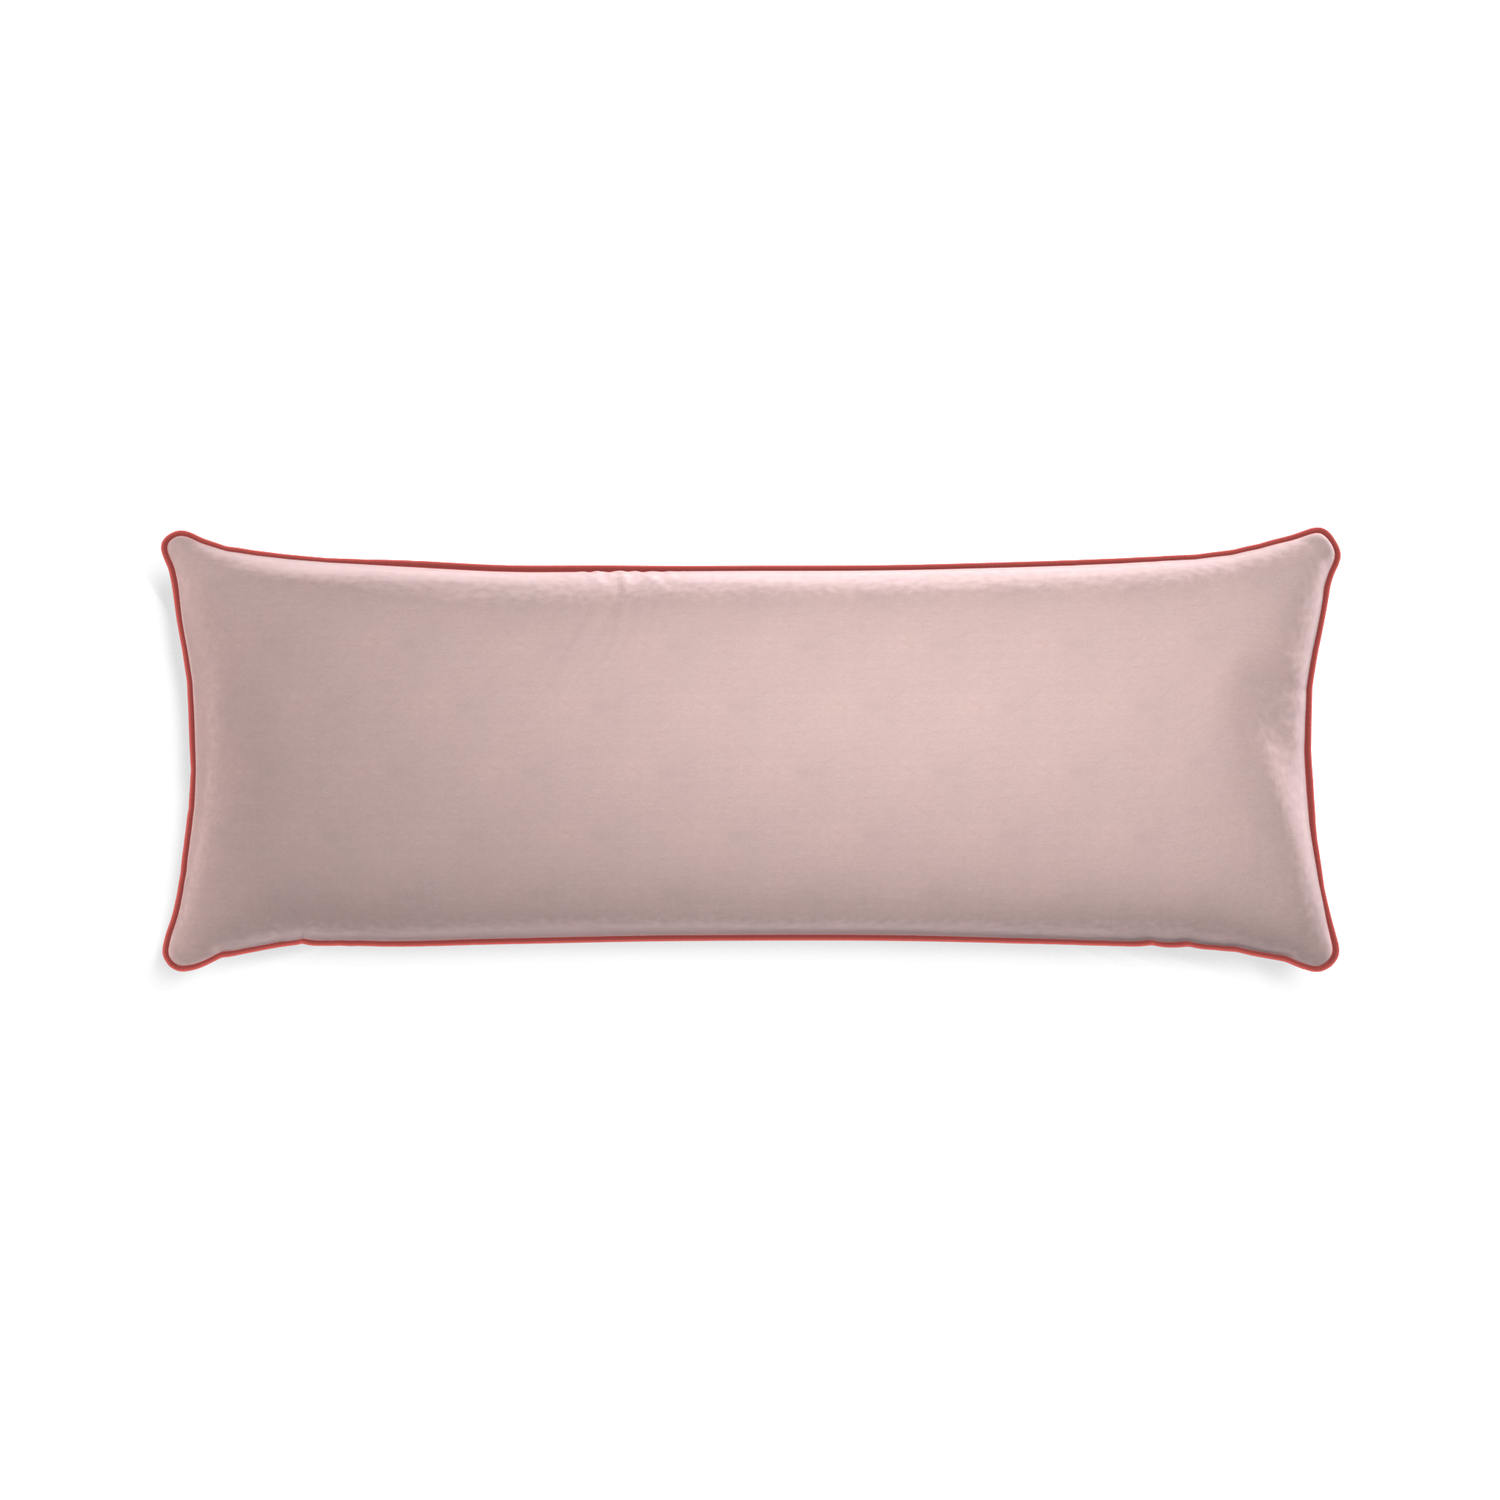 rectangle light pink velvet pillow with coral piping